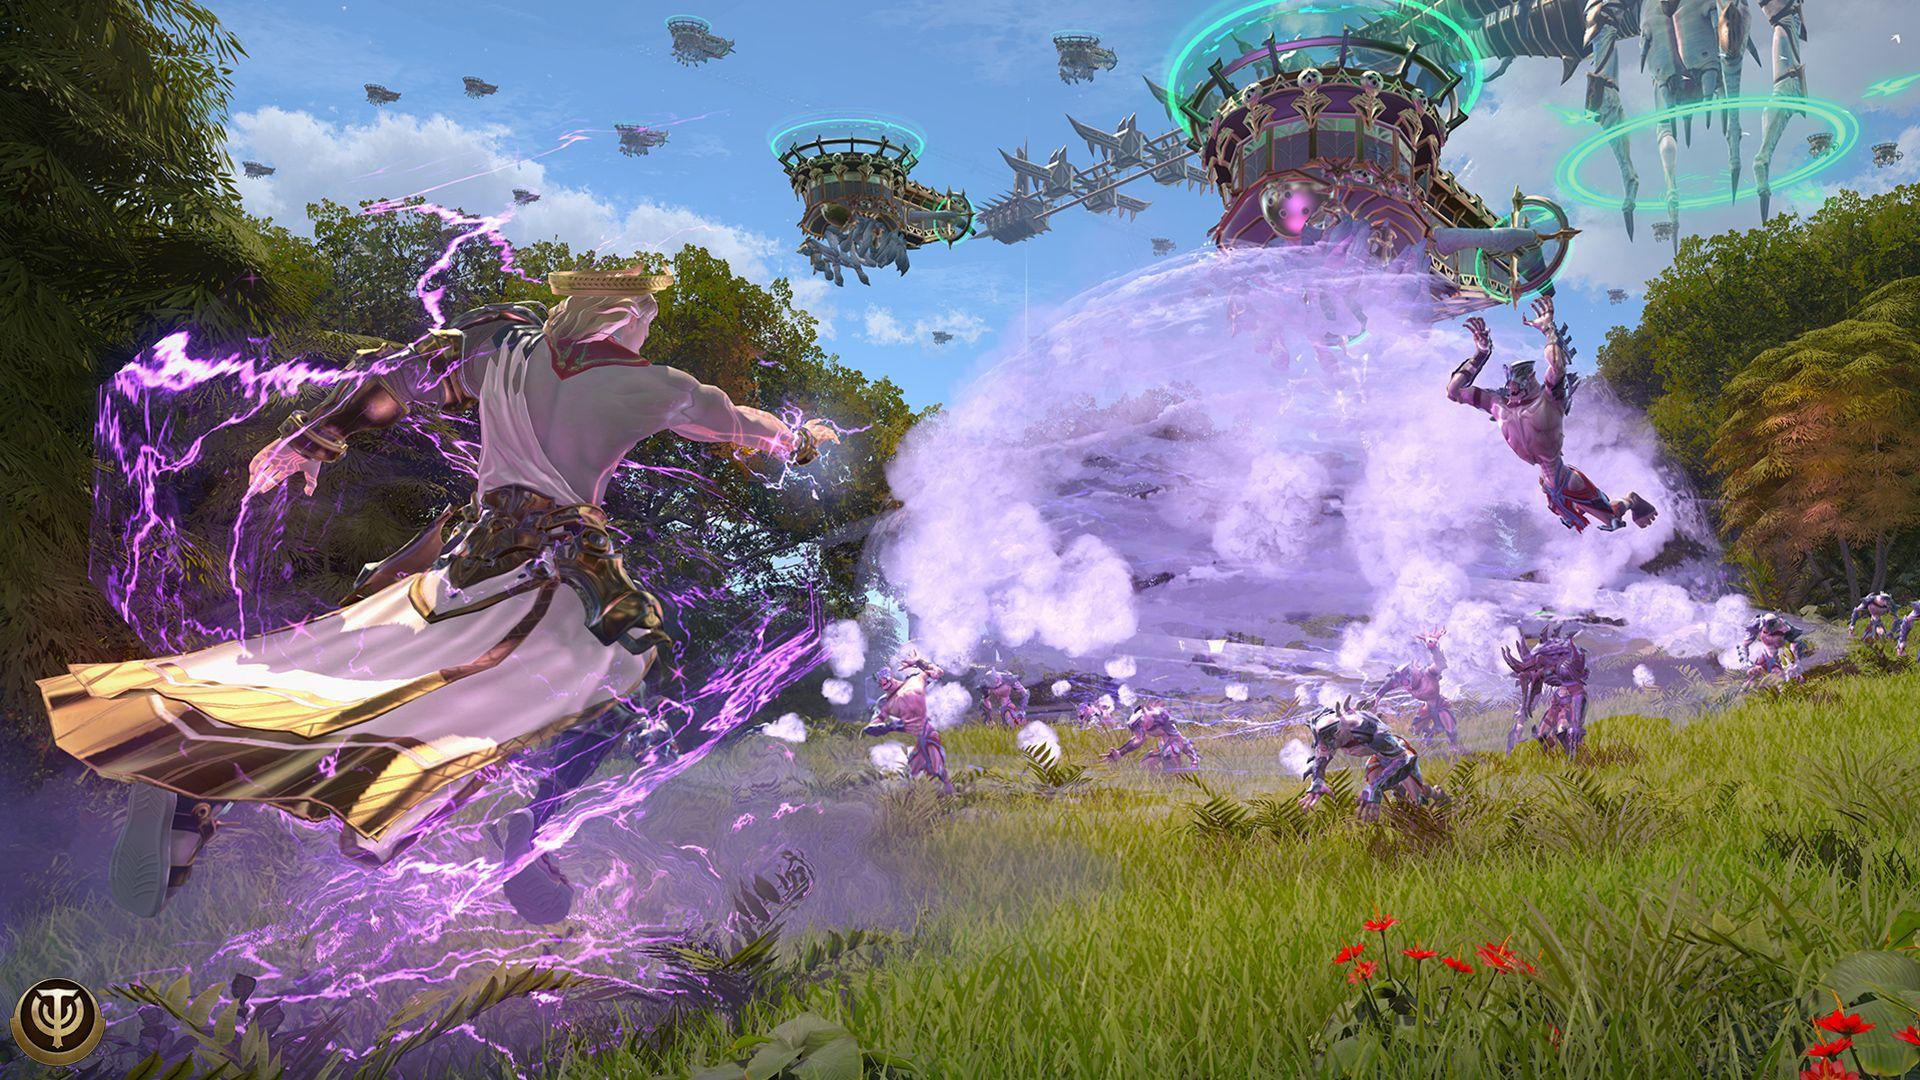 Skyforge PS4 gameplay impressions from beta early access